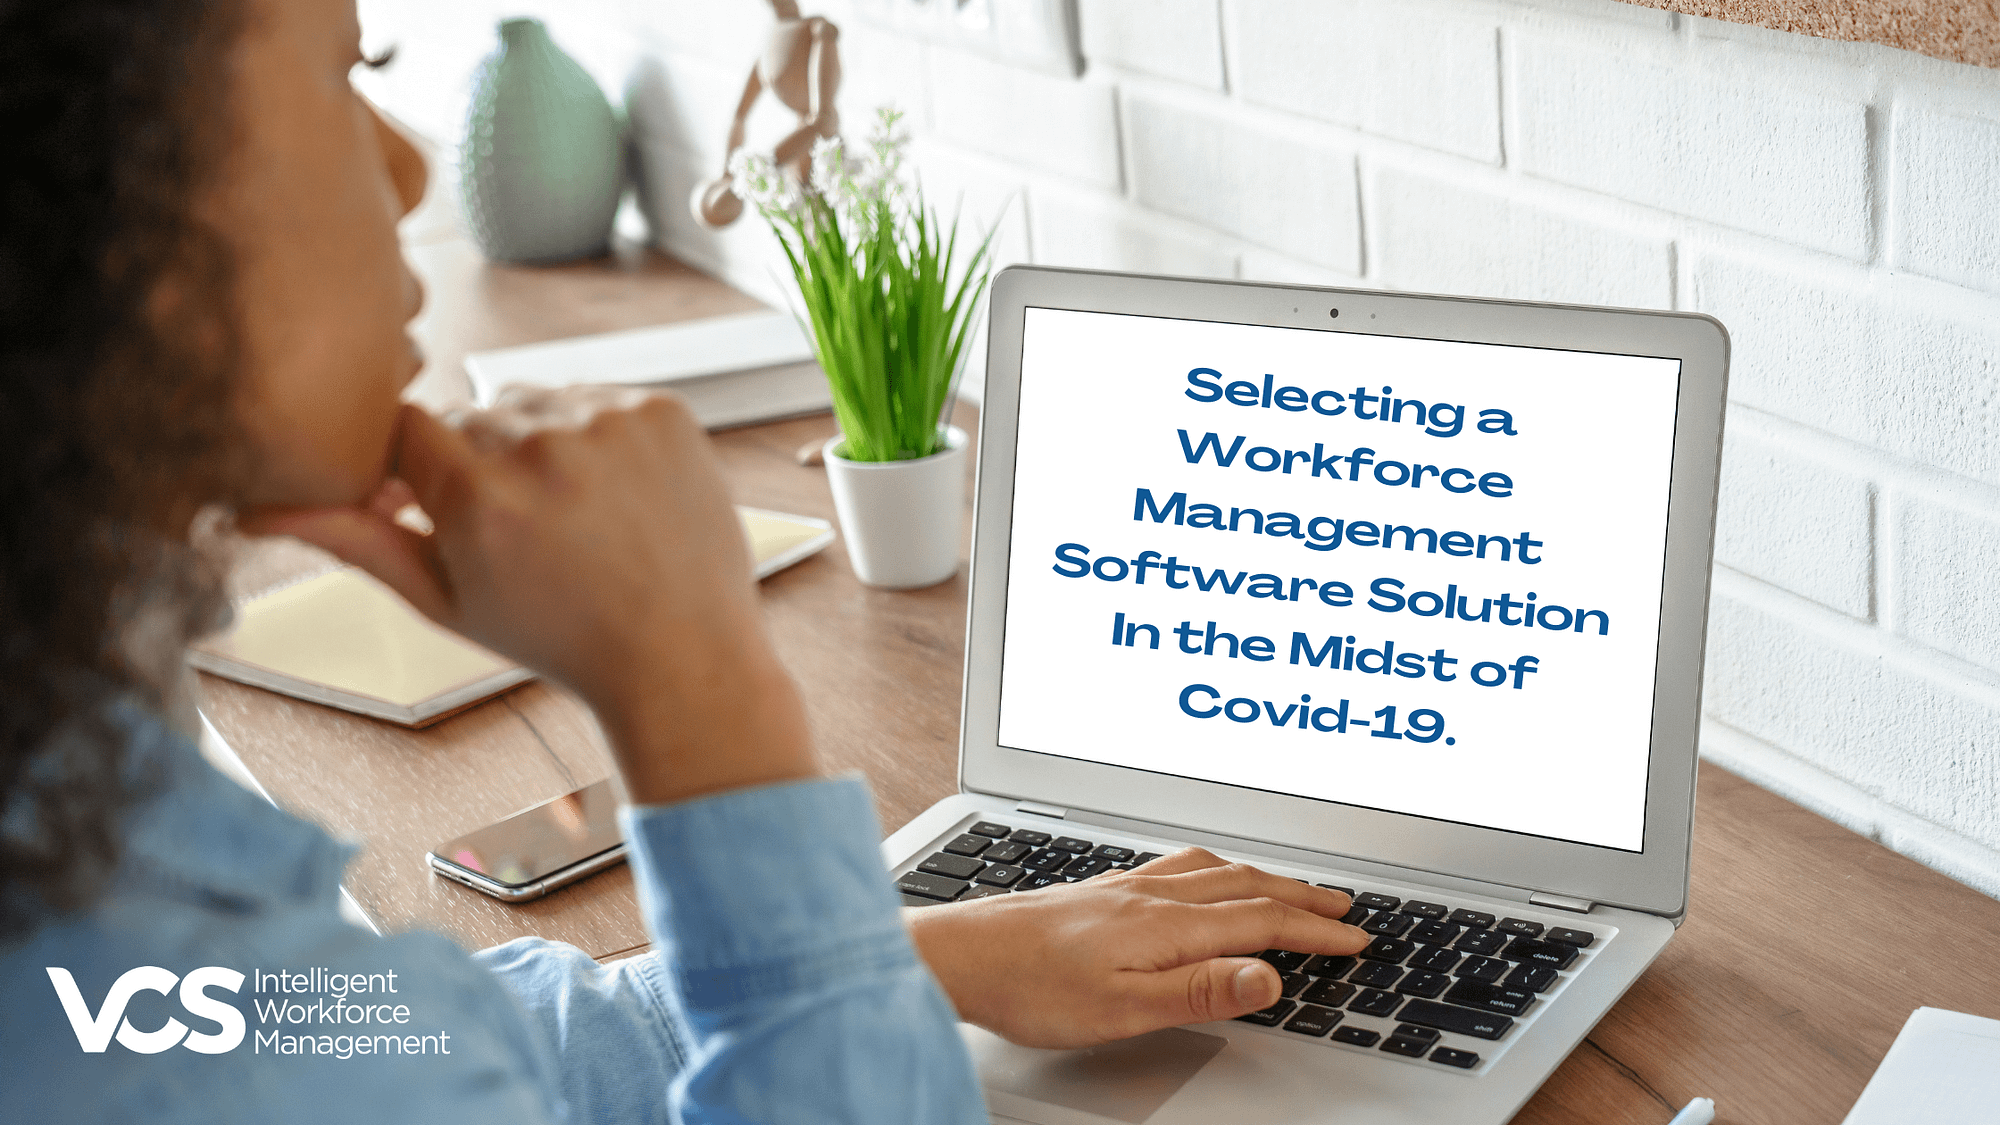 Selecting a Workforce Management Software Solution In the Midst of Covid-19.